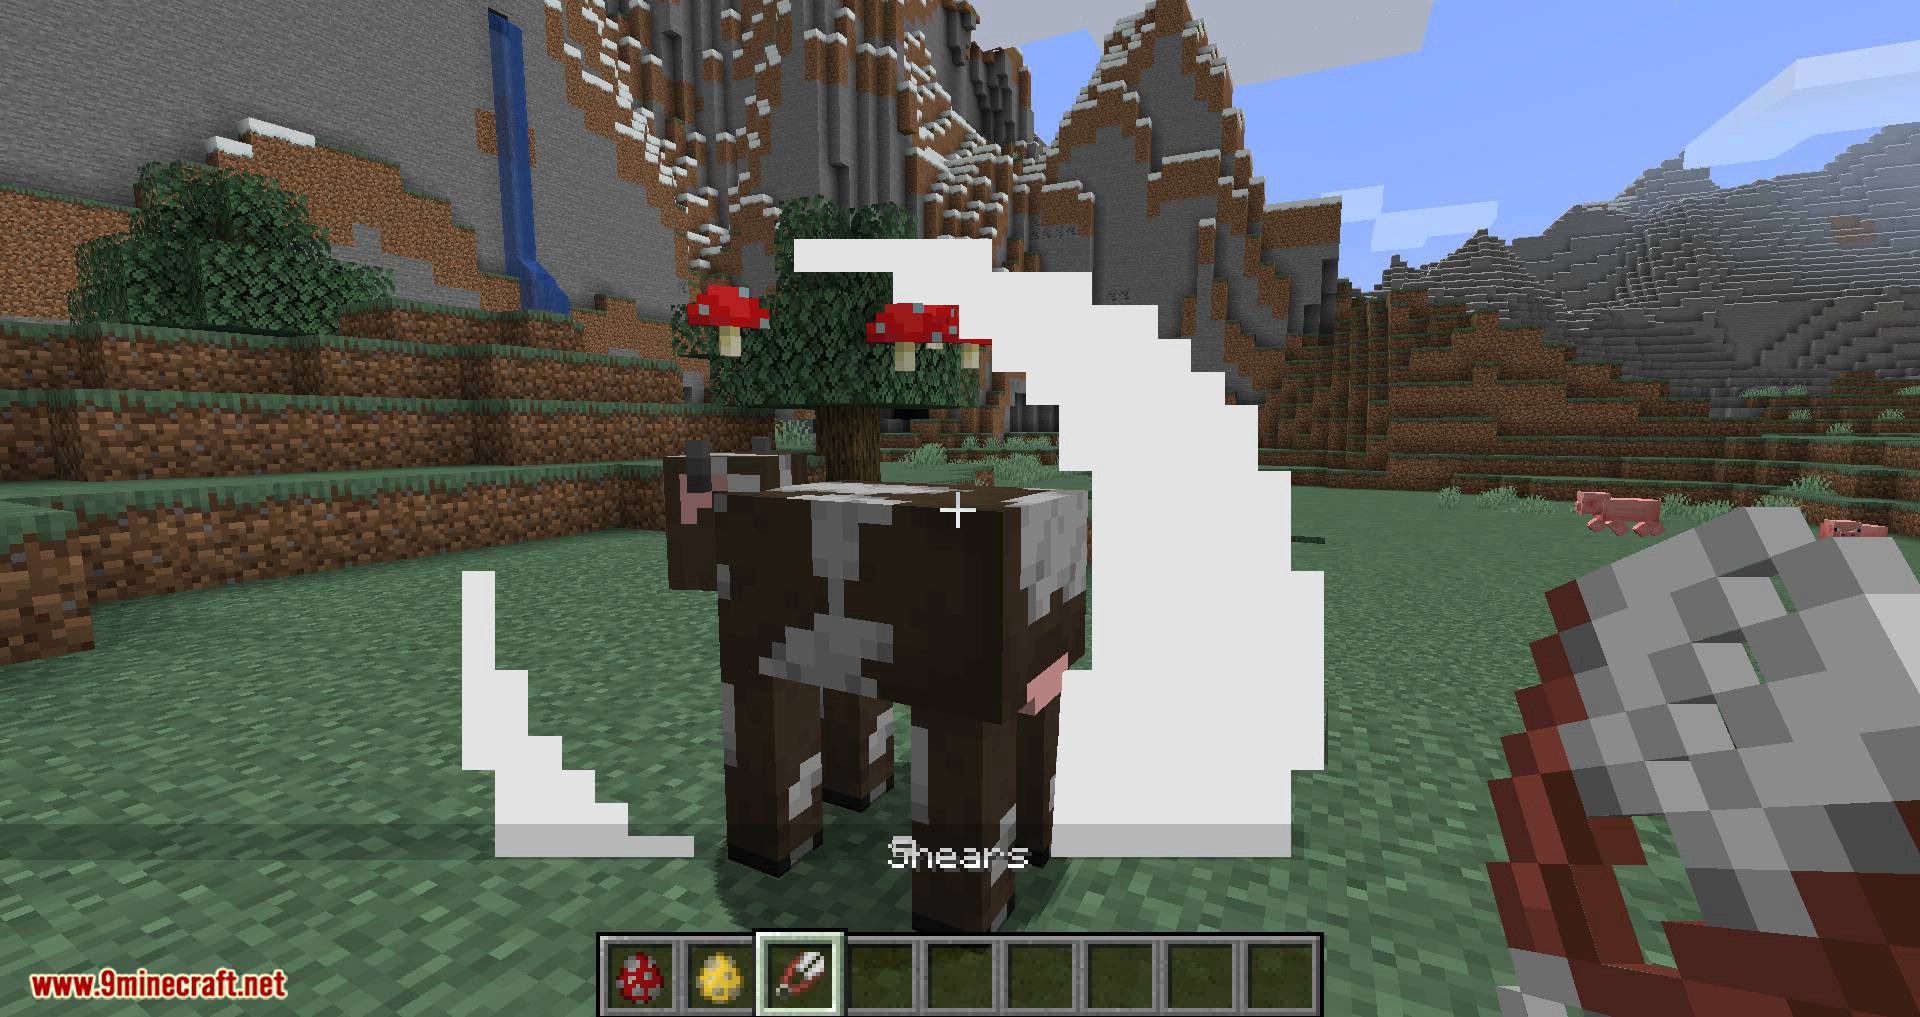 Mooblooms mod for minecraft 02